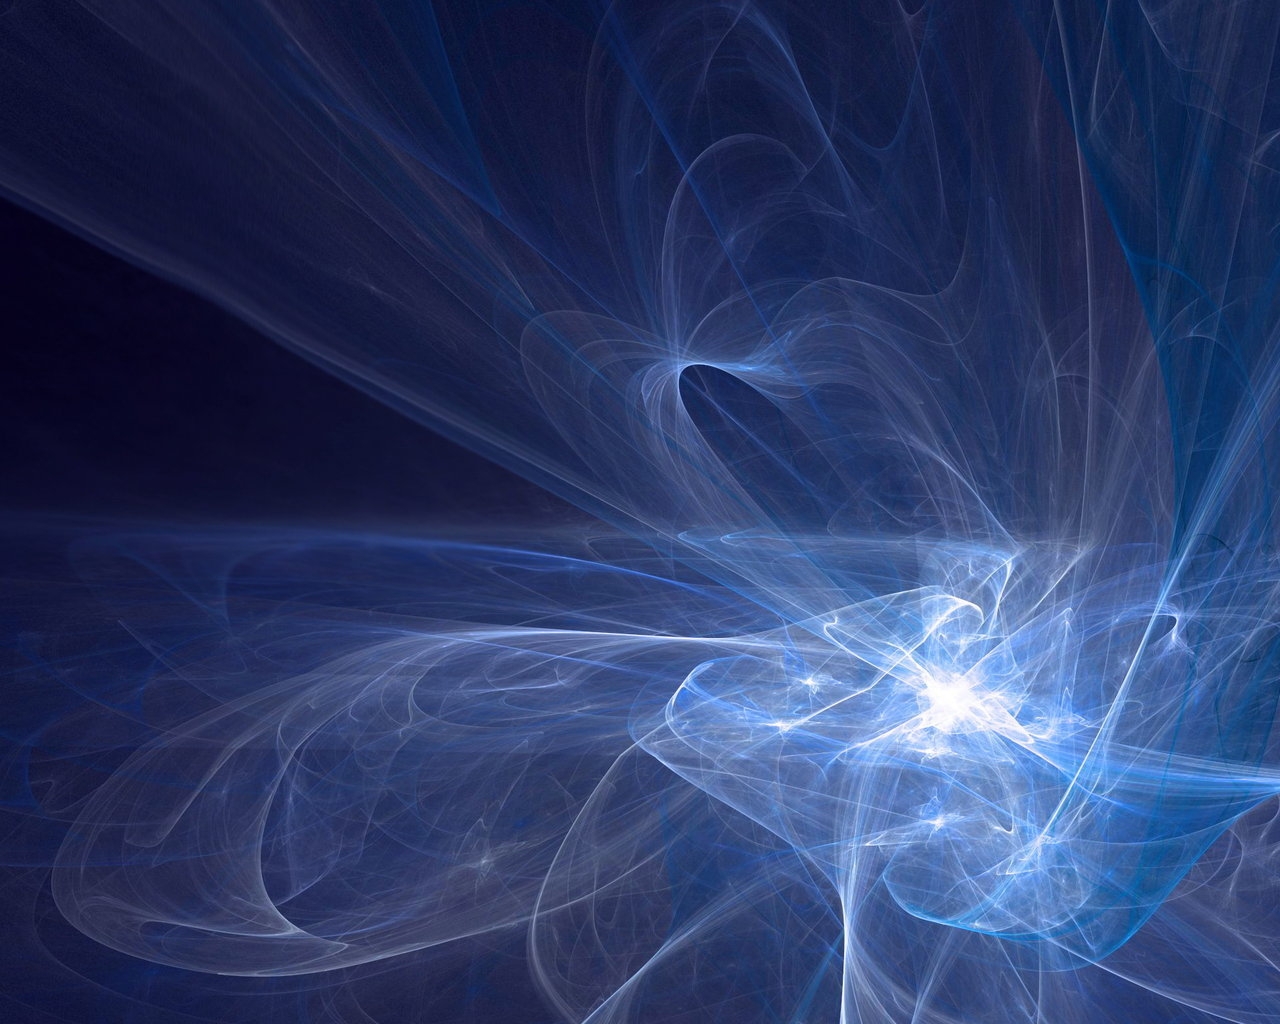 Great Blue Fractal for 1280 x 1024 resolution